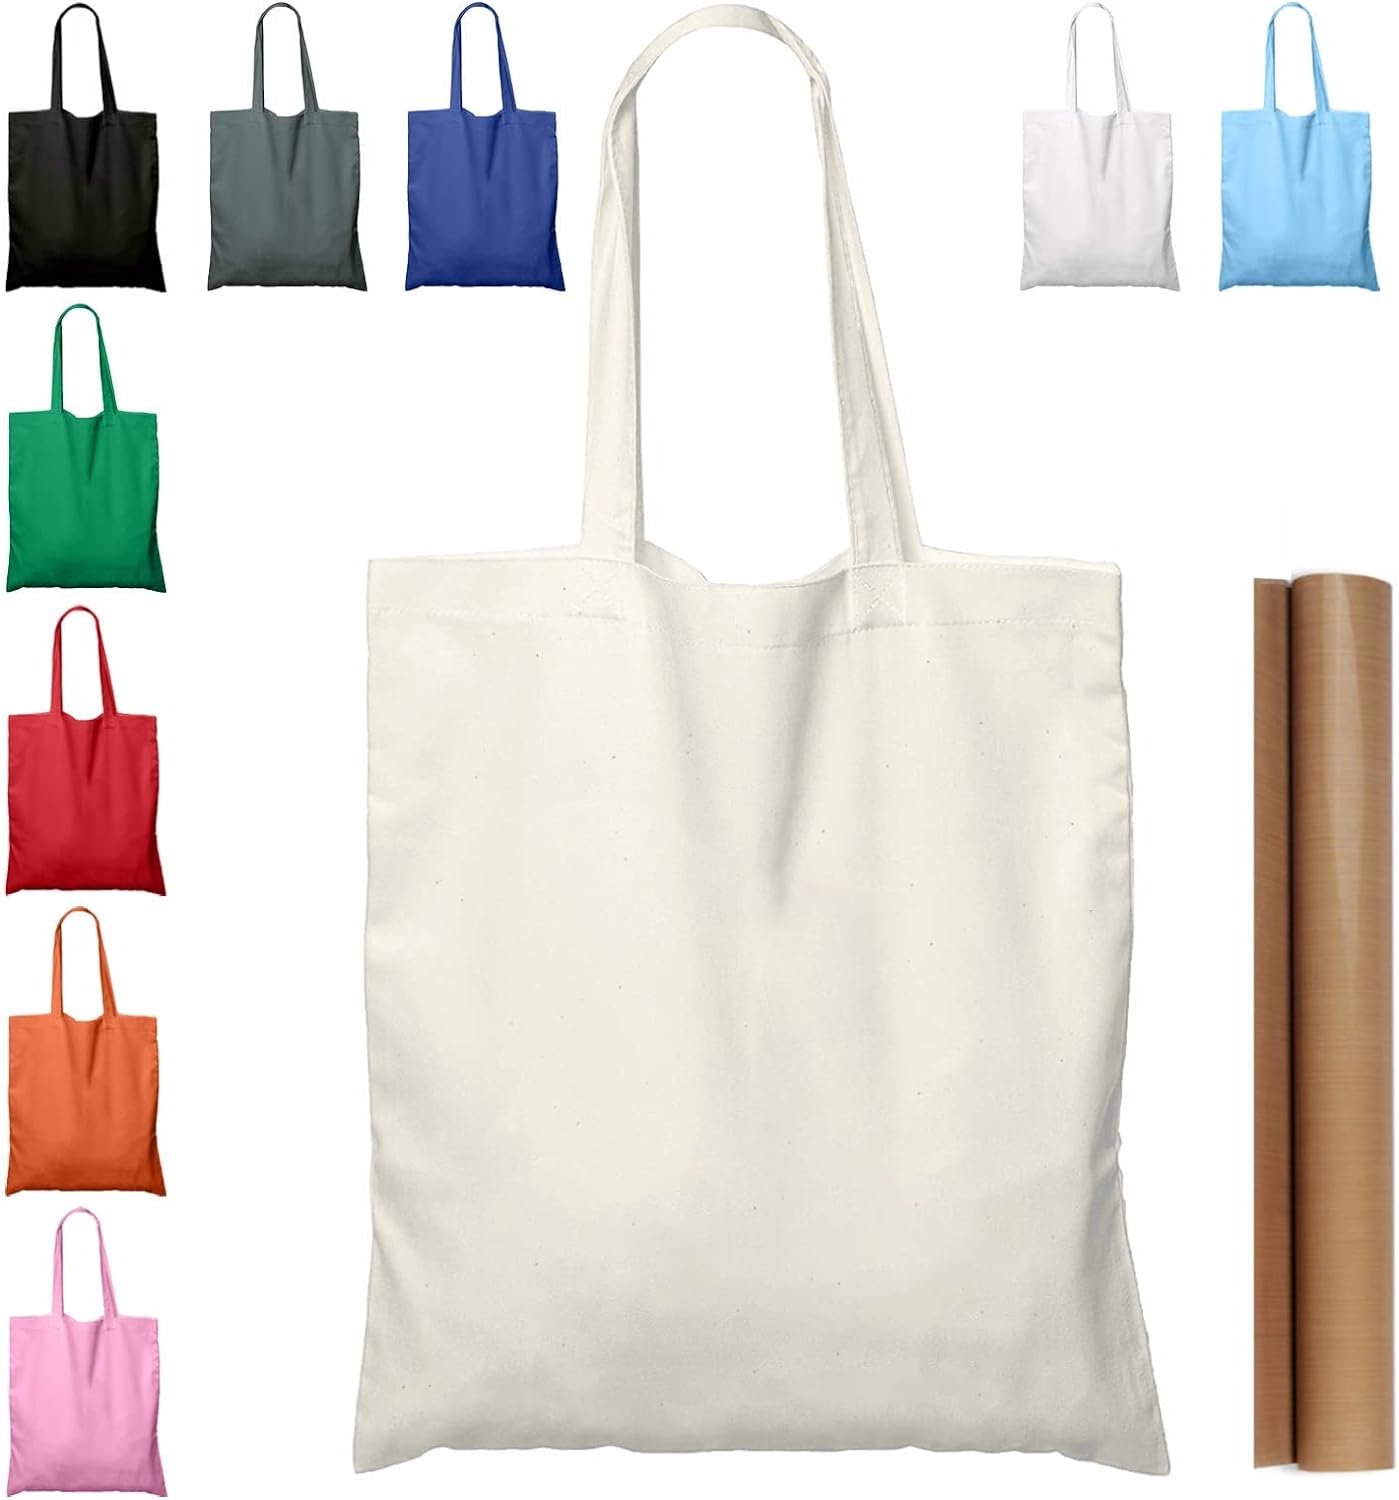 NPBAG 5 | 15 | 25 | 50 Pack 15 X 16 Natural Cotton Tote Bags, Lightweight Blank Bulk Cloth bags with 1pc of PTFE Teflon Sheet (5-Pack)